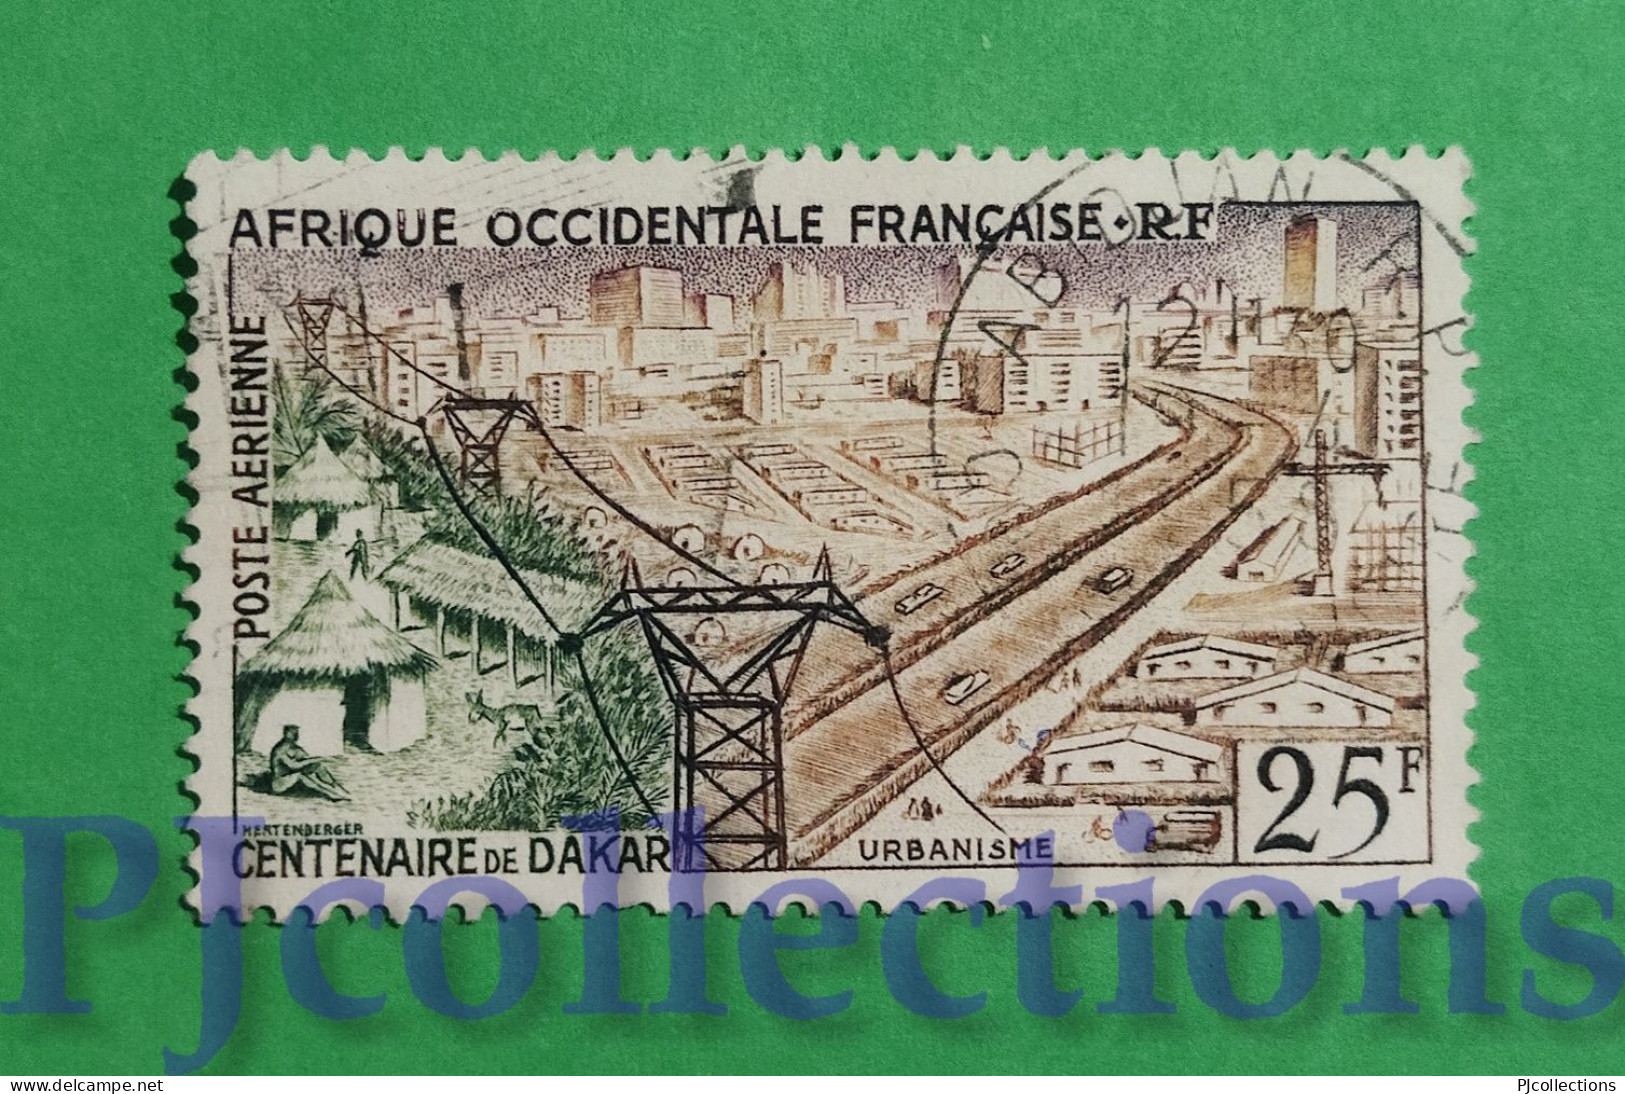 S603 - AFRICA OCCIDENTALE FRANCESE - AOF 1958 CENTENARIO DI DAKAR 25f USATO - USED - Used Stamps